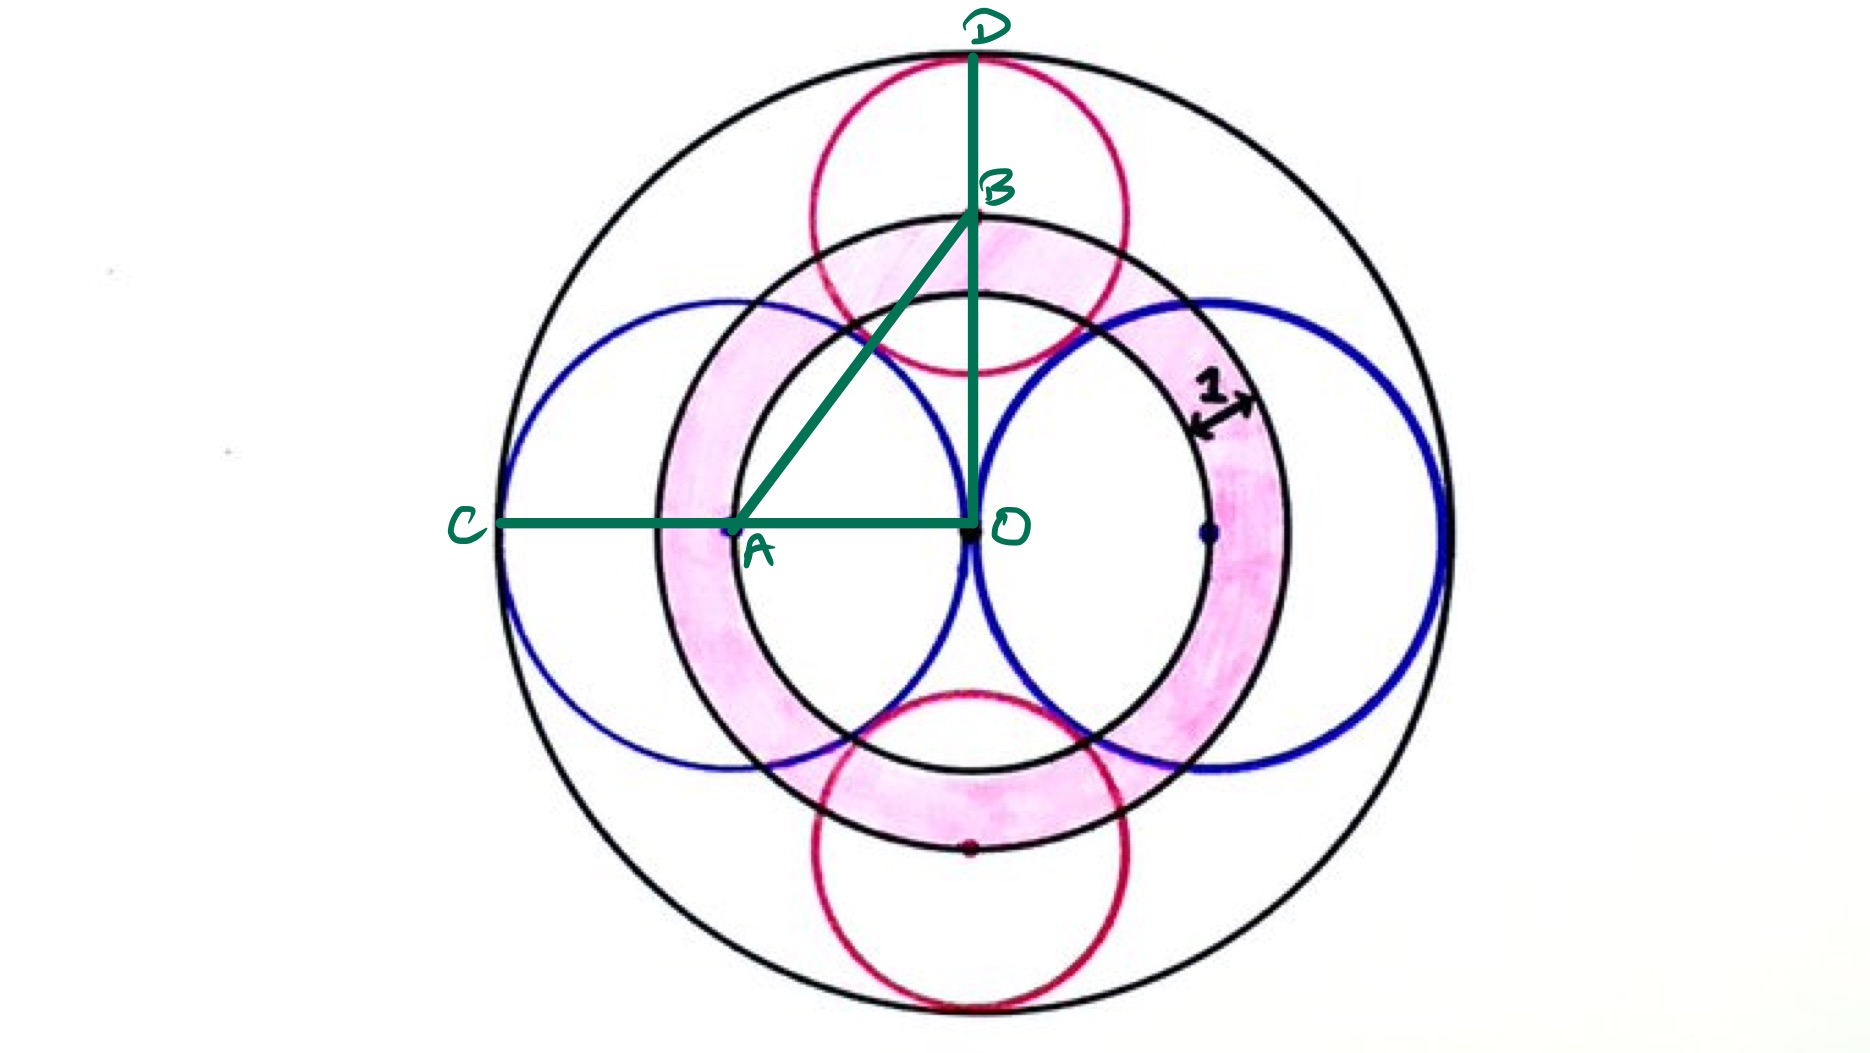 Seven circles labelled